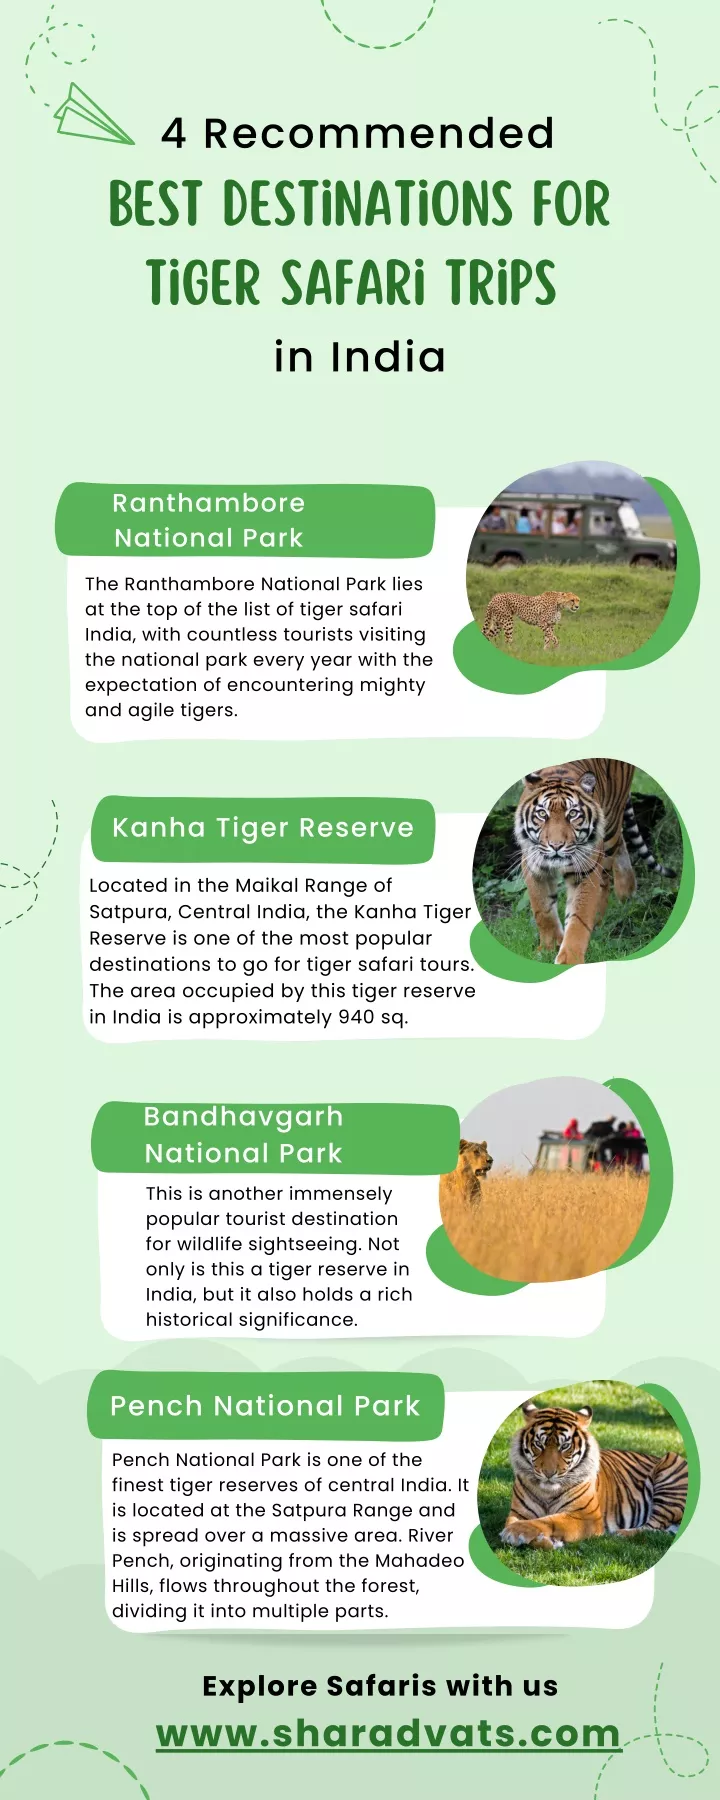 4 recommended best destinations for tiger safari